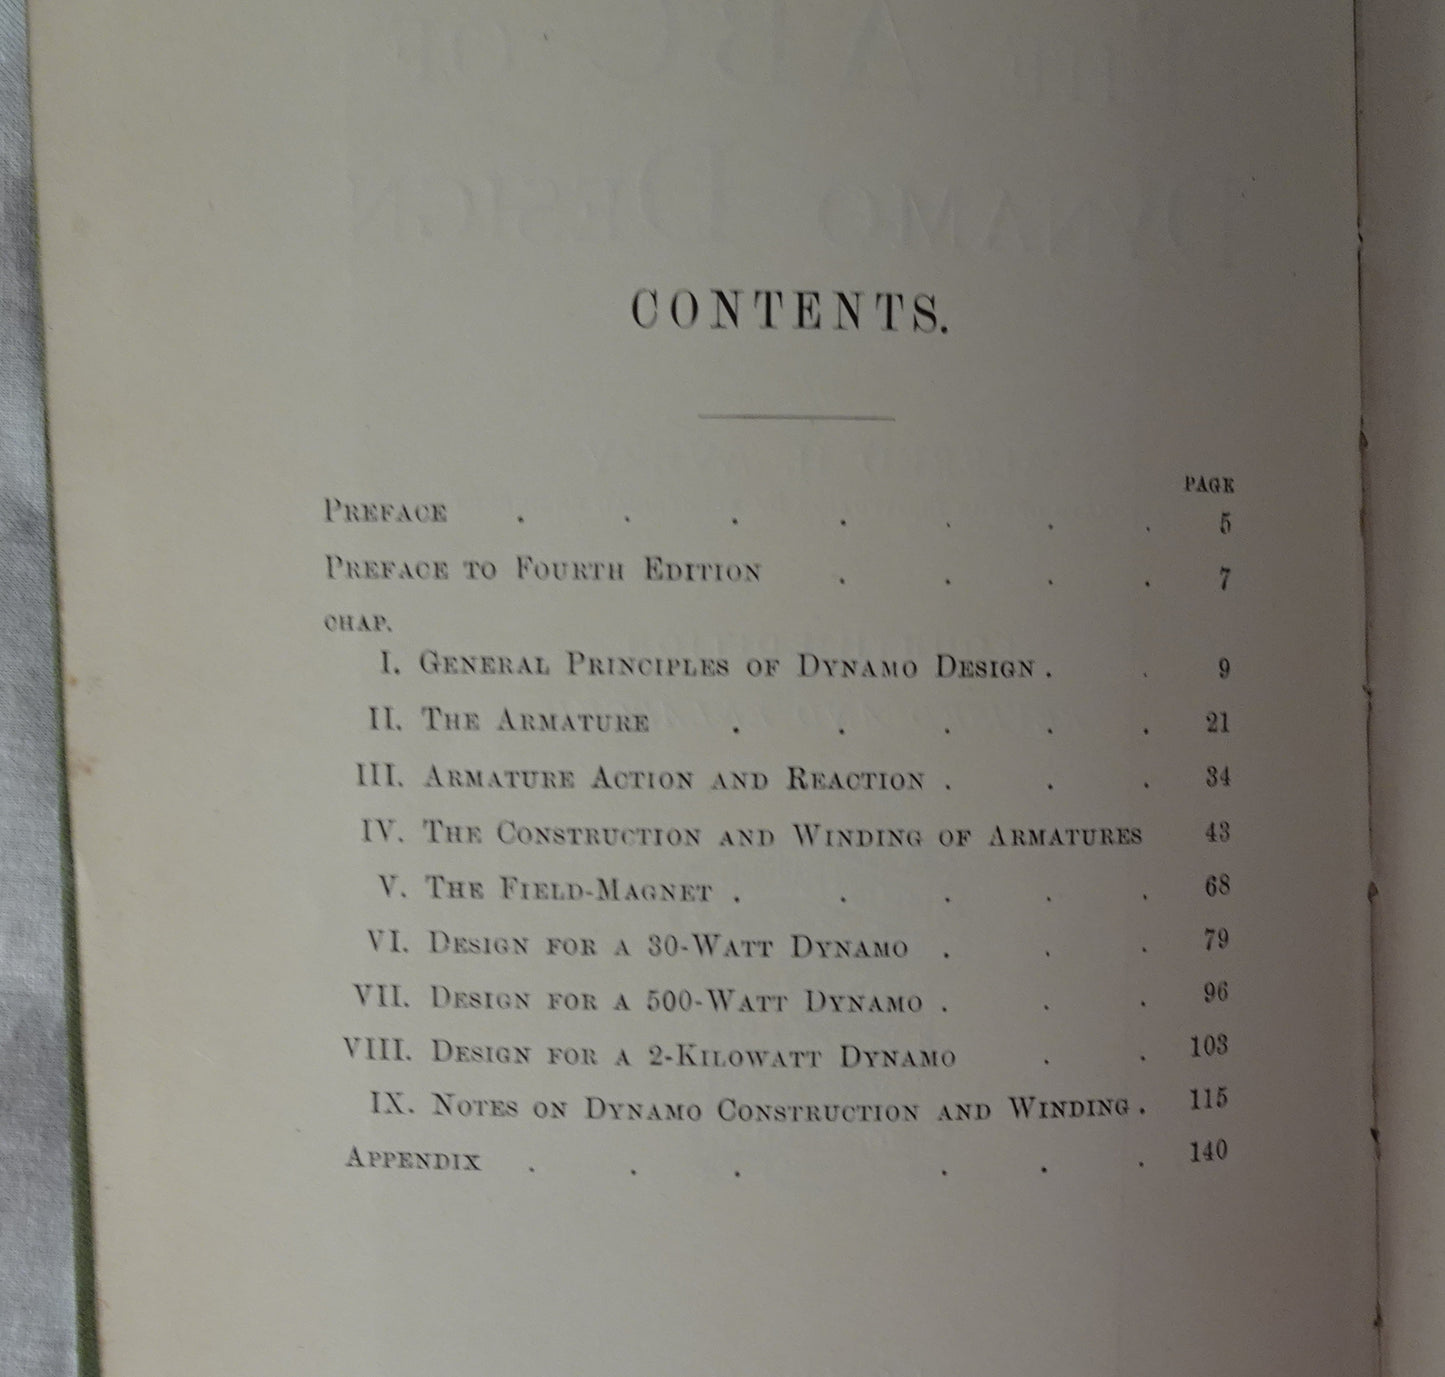 The ABC of Dynamo Design by Alfred H. Avery